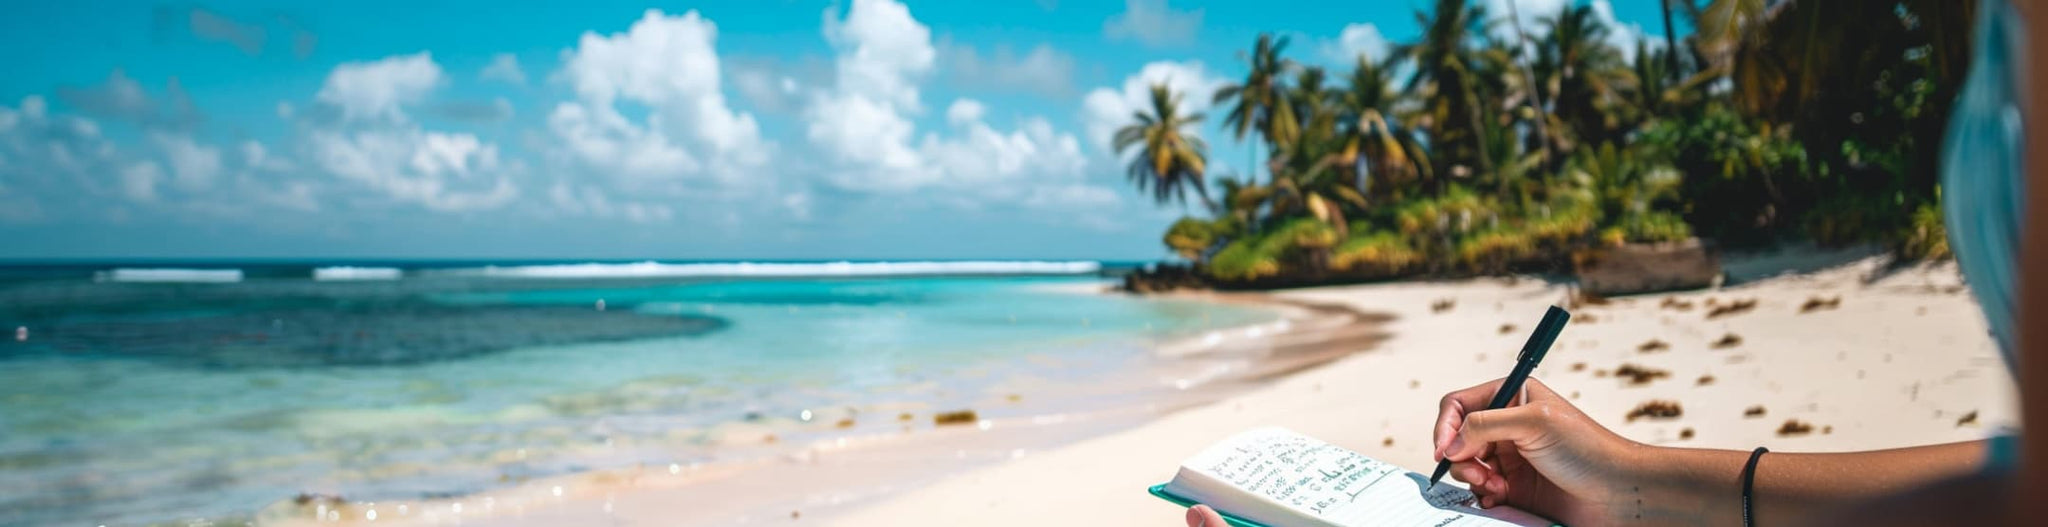 A person writing in a journal on a tropical beach